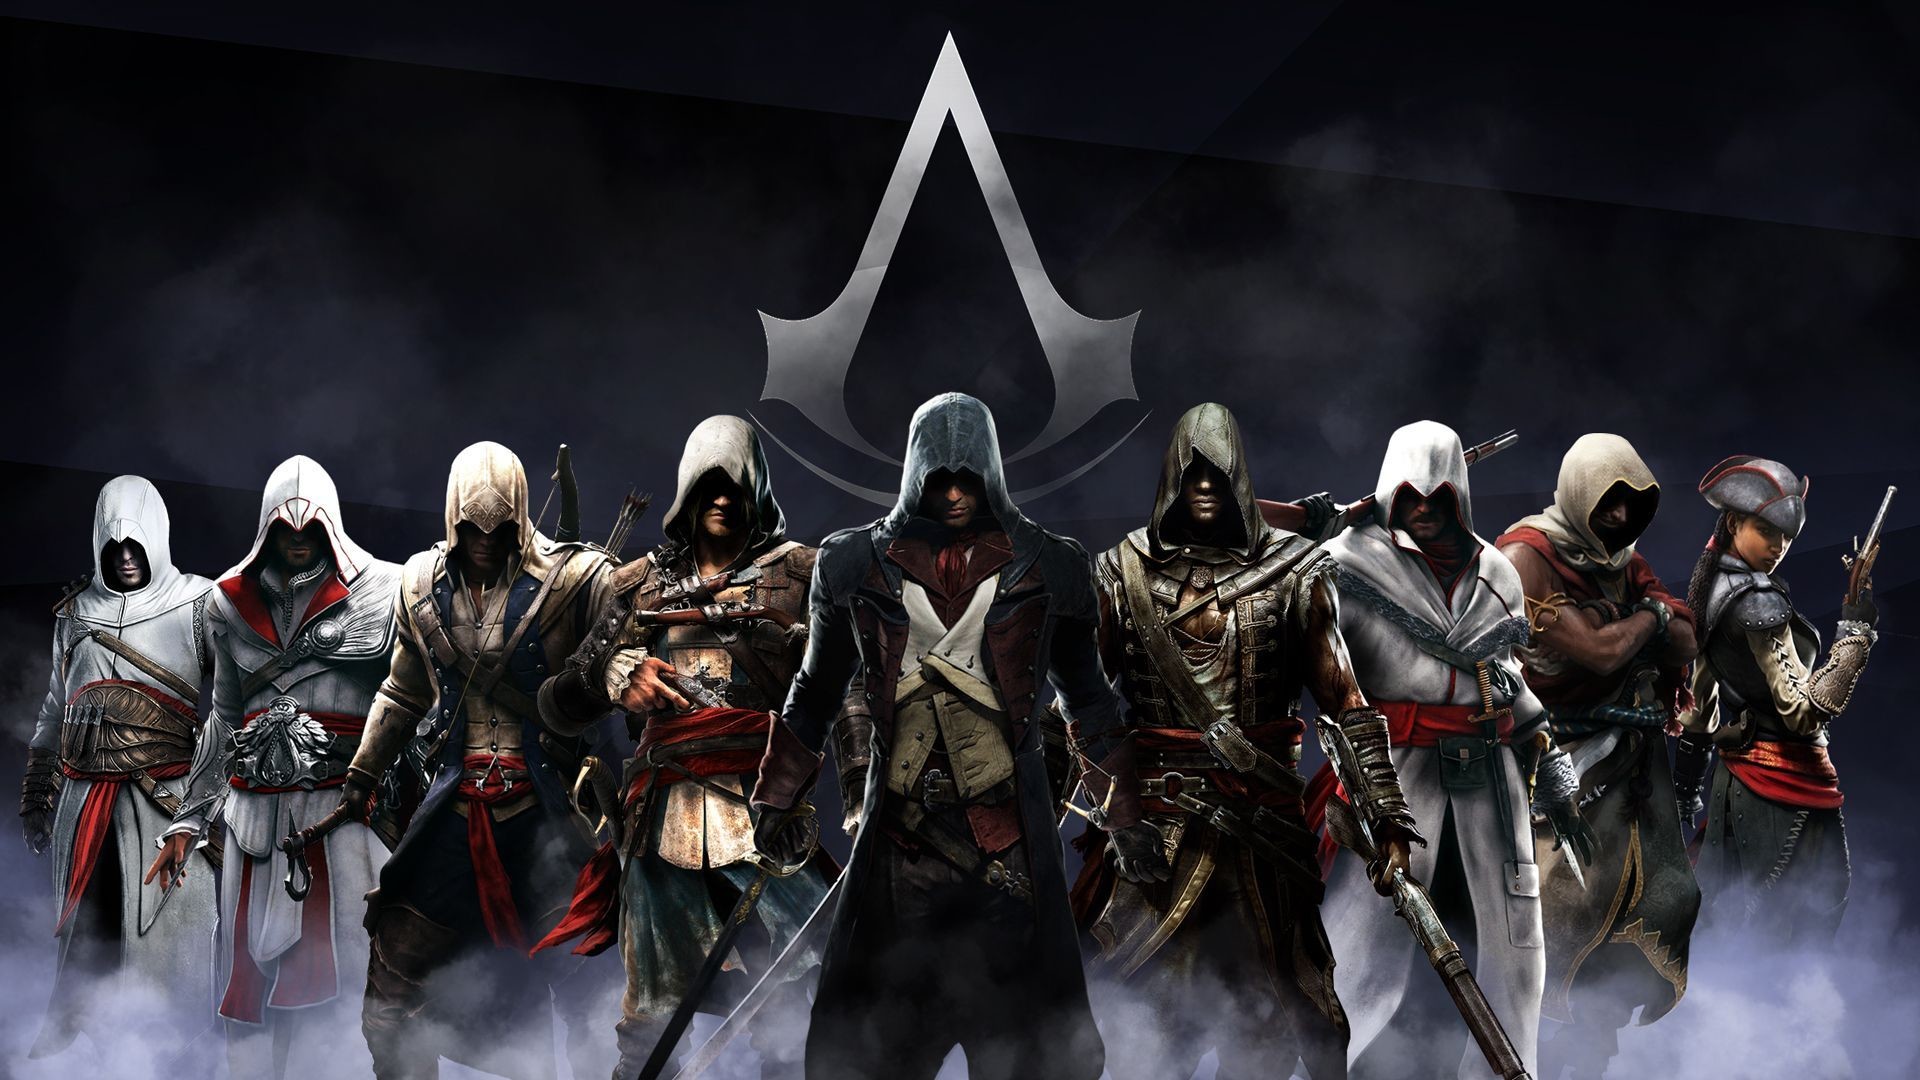 1920x1080 assassin-creed-wallpapers-hd